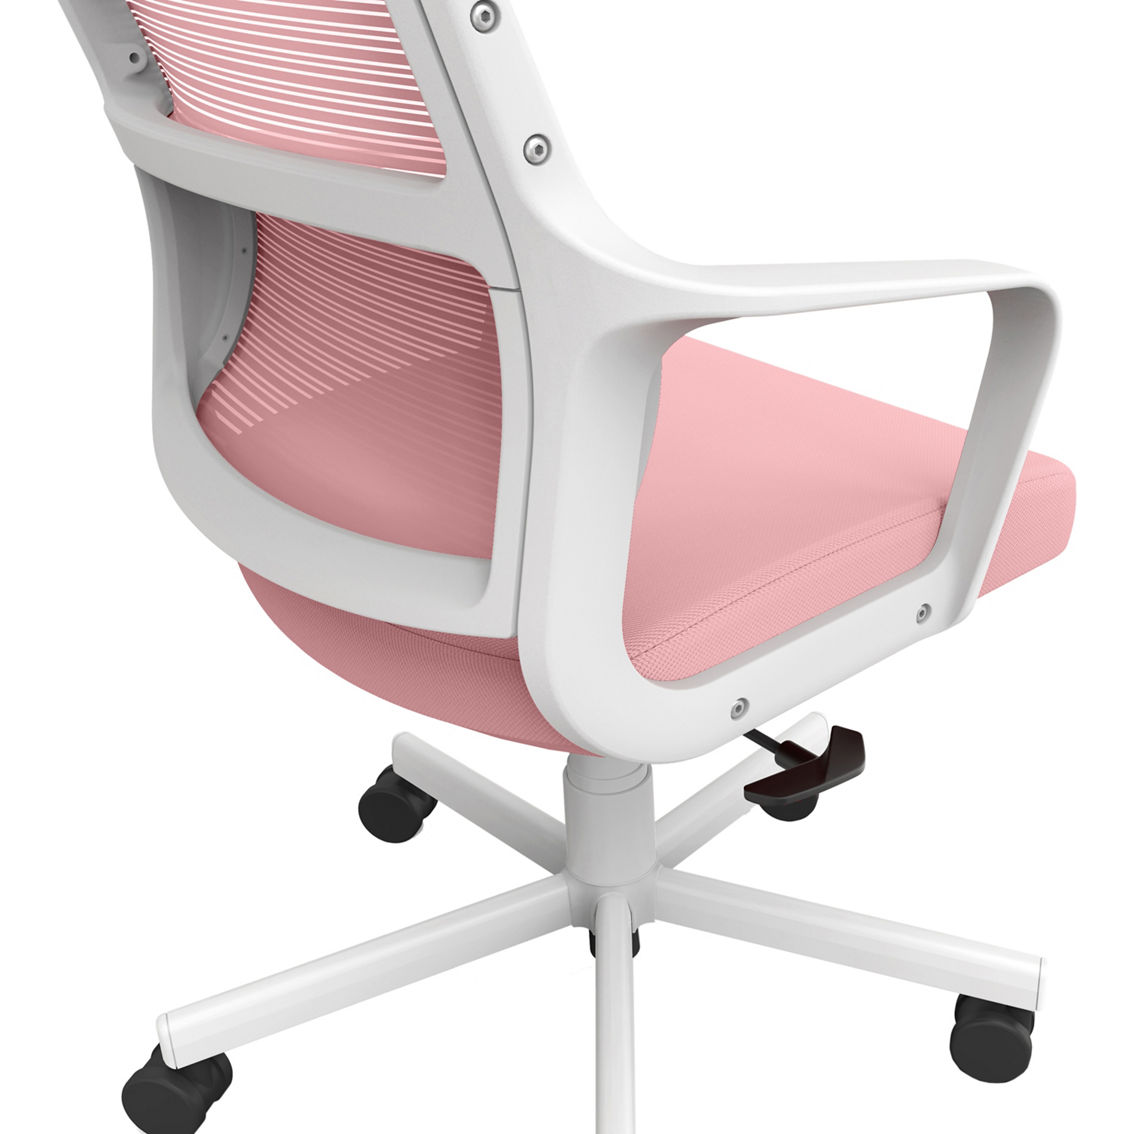 Furniture of America Tilih Pink-White Mesh Office Chair - Image 3 of 3